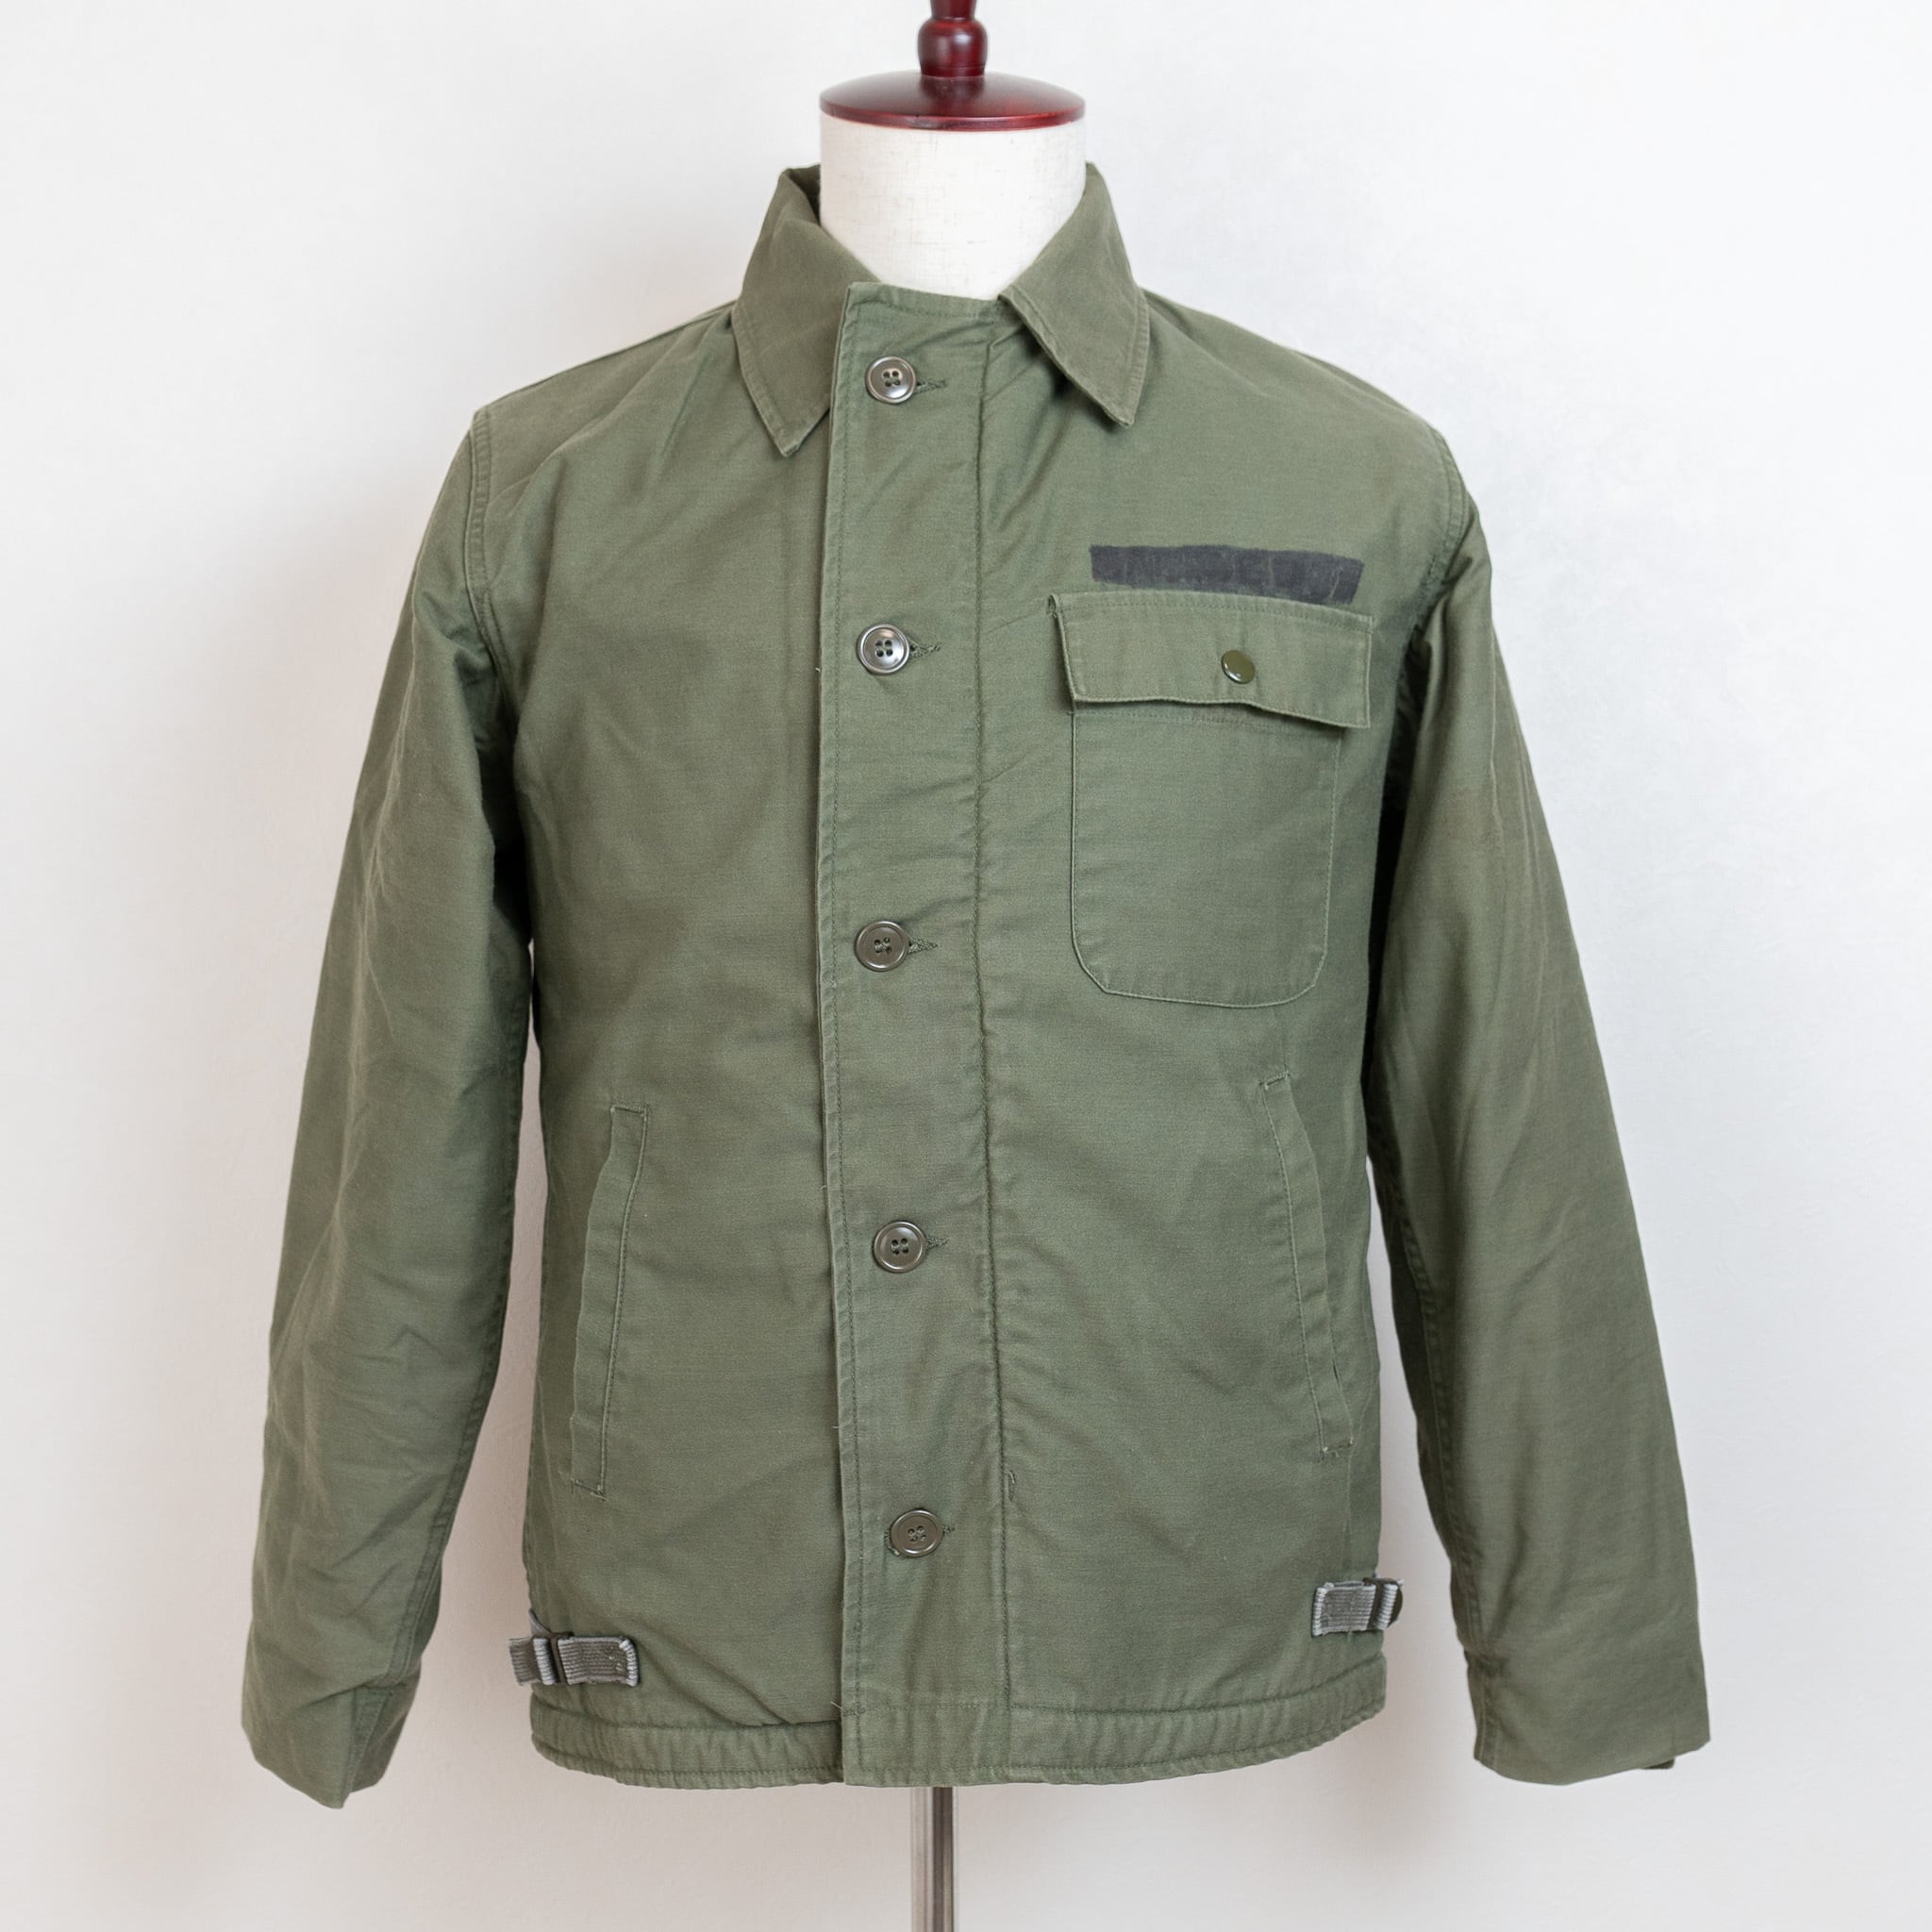 U.S.Navy A Deck Jacket Small "Used" 実物 アメリカ海軍 Aデッキ